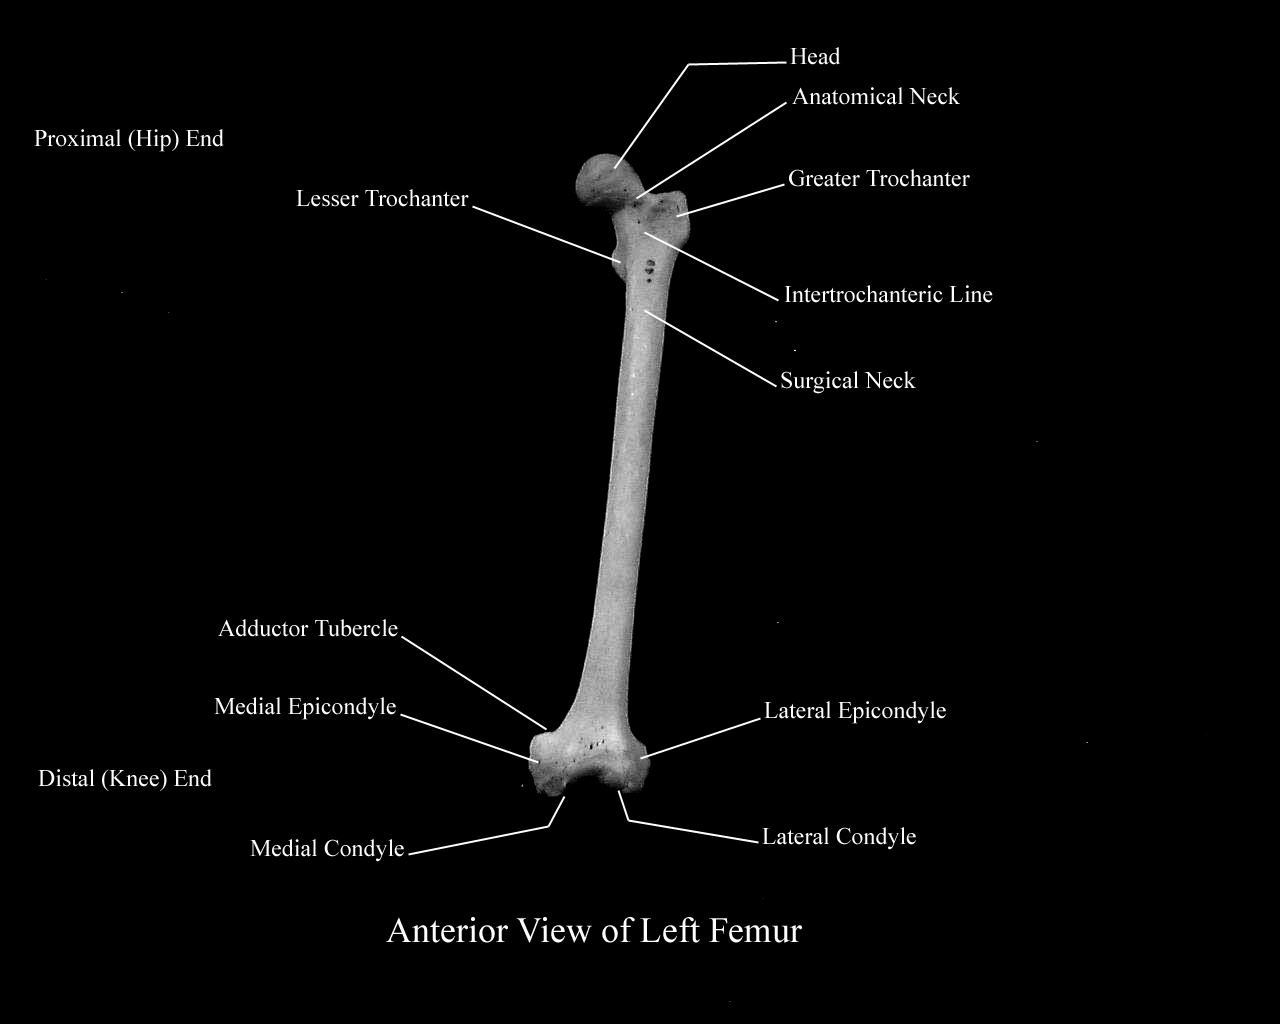 a labeled picture of of the structures of the fumer from an anterior view